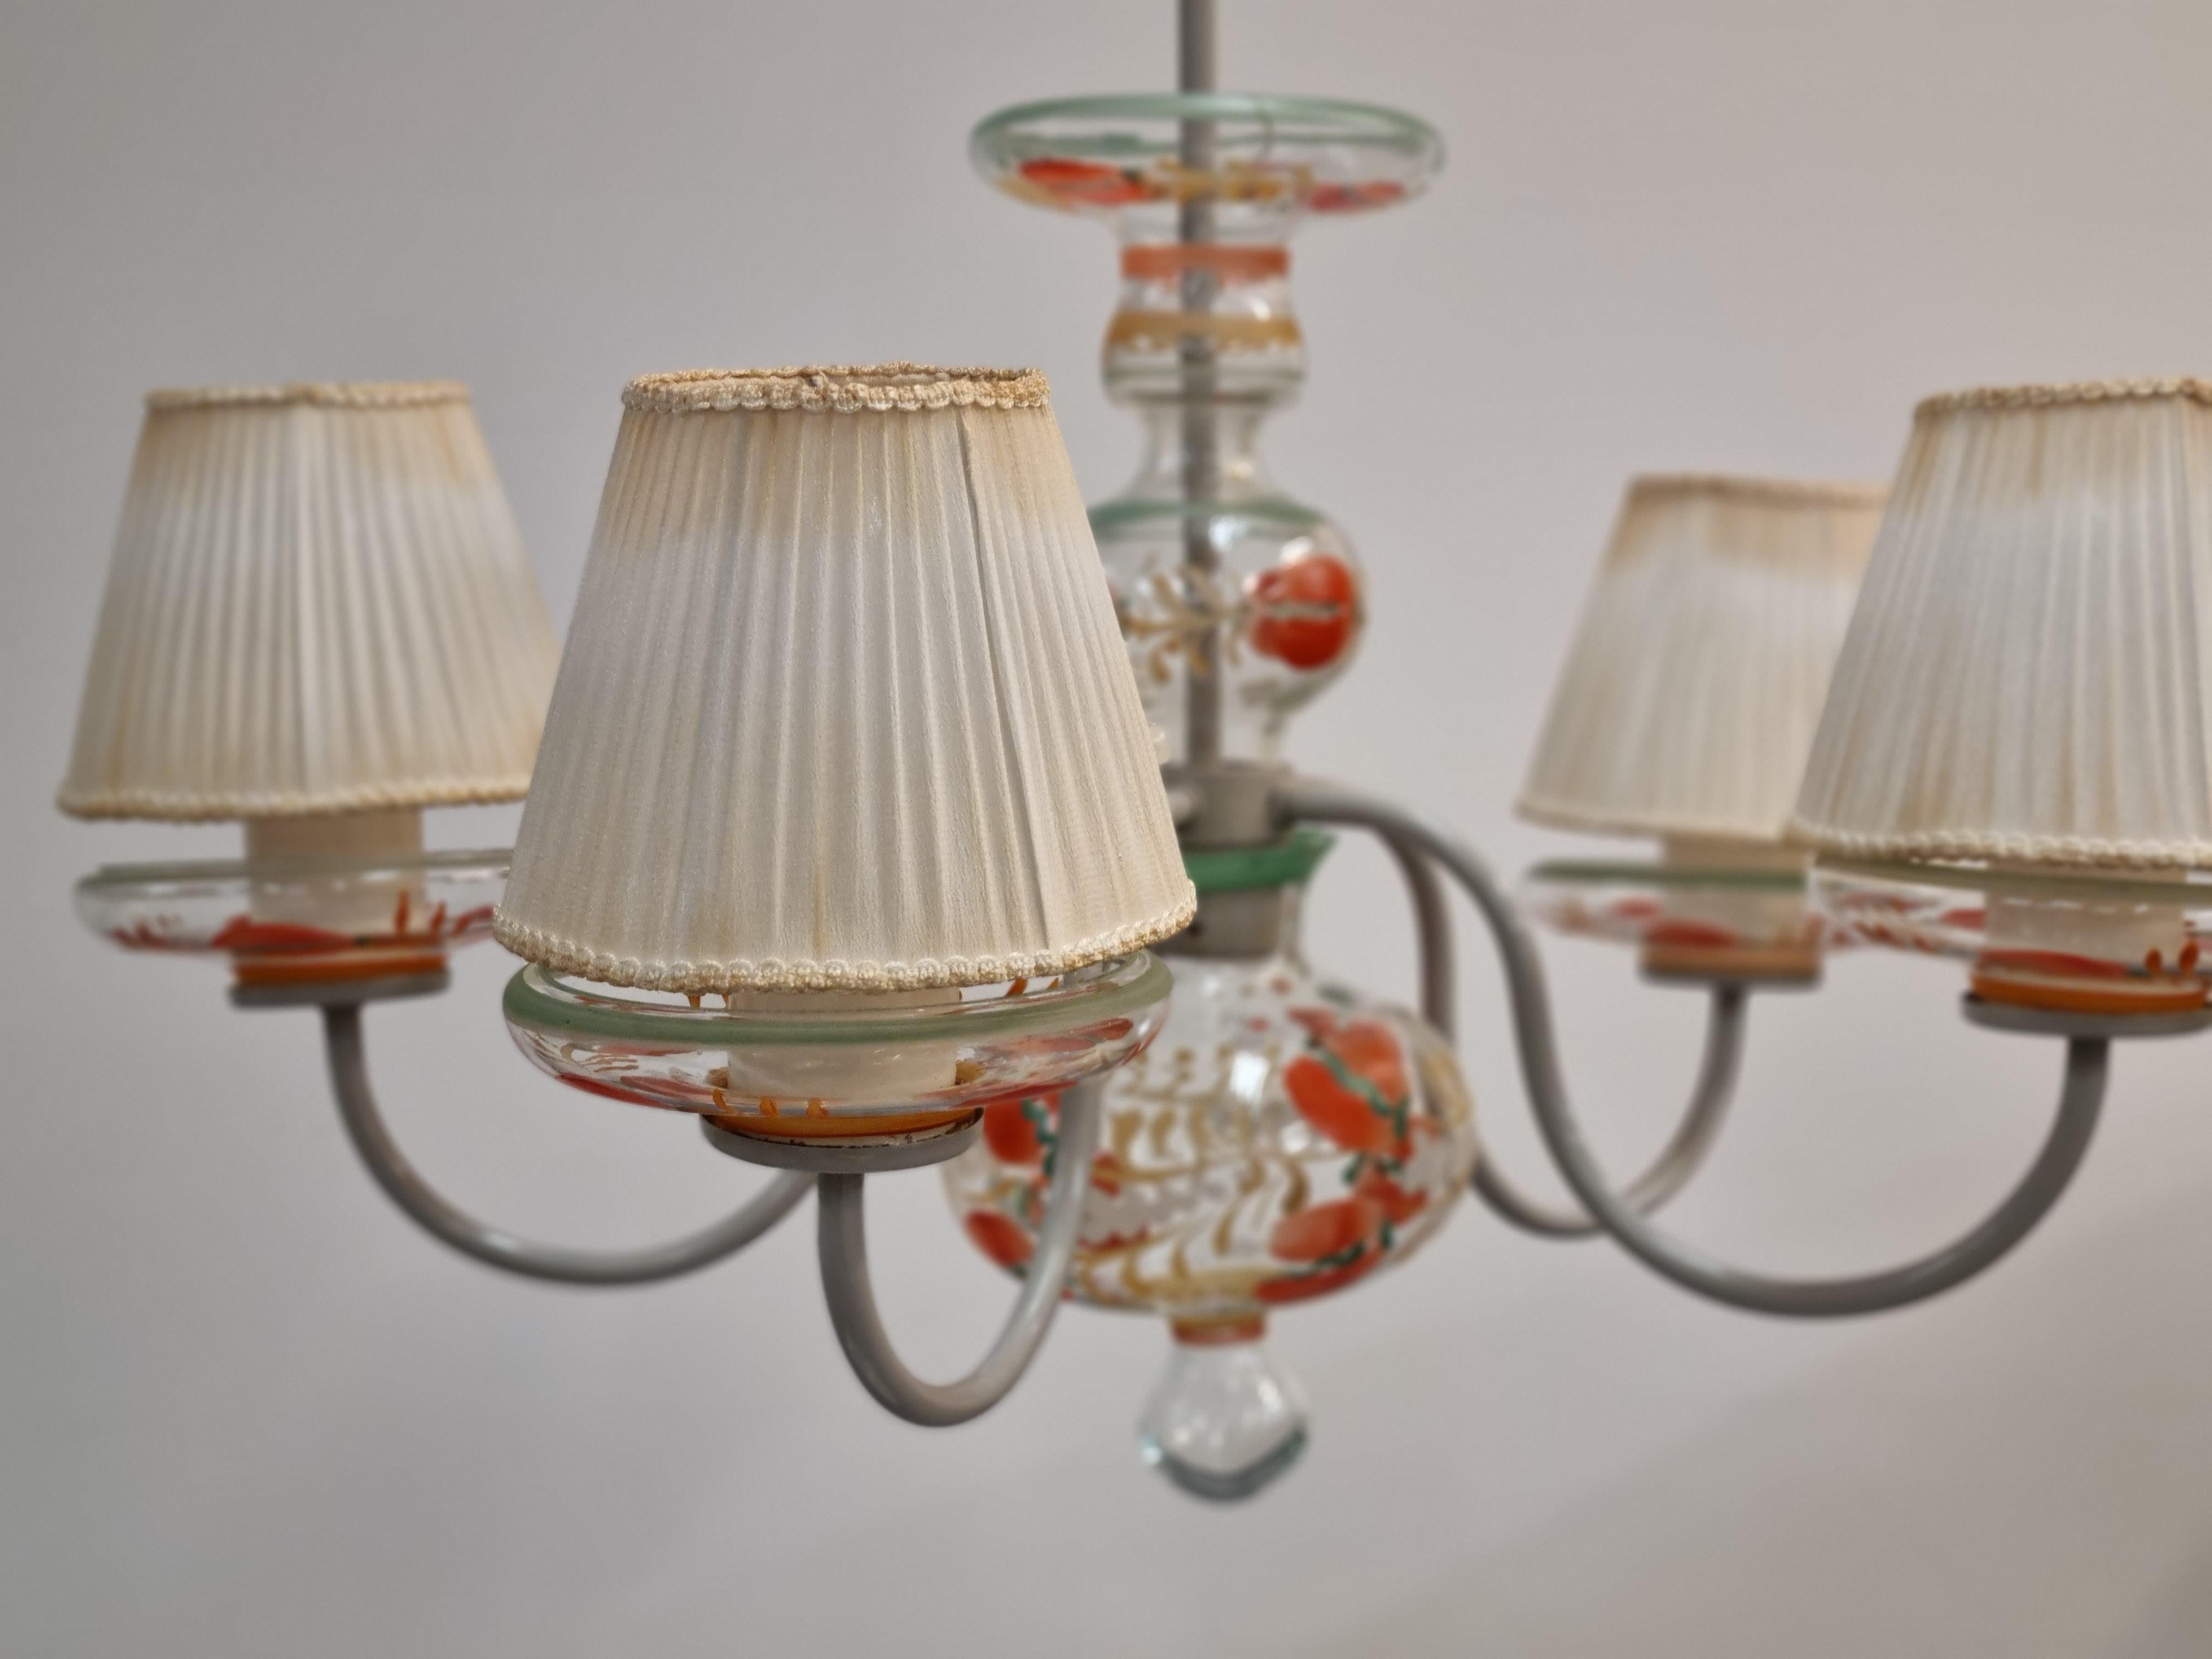 Paavo Tynell, War Time Ceiling Lamp, Taito, Kauklahti Glass Factory For Sale 1